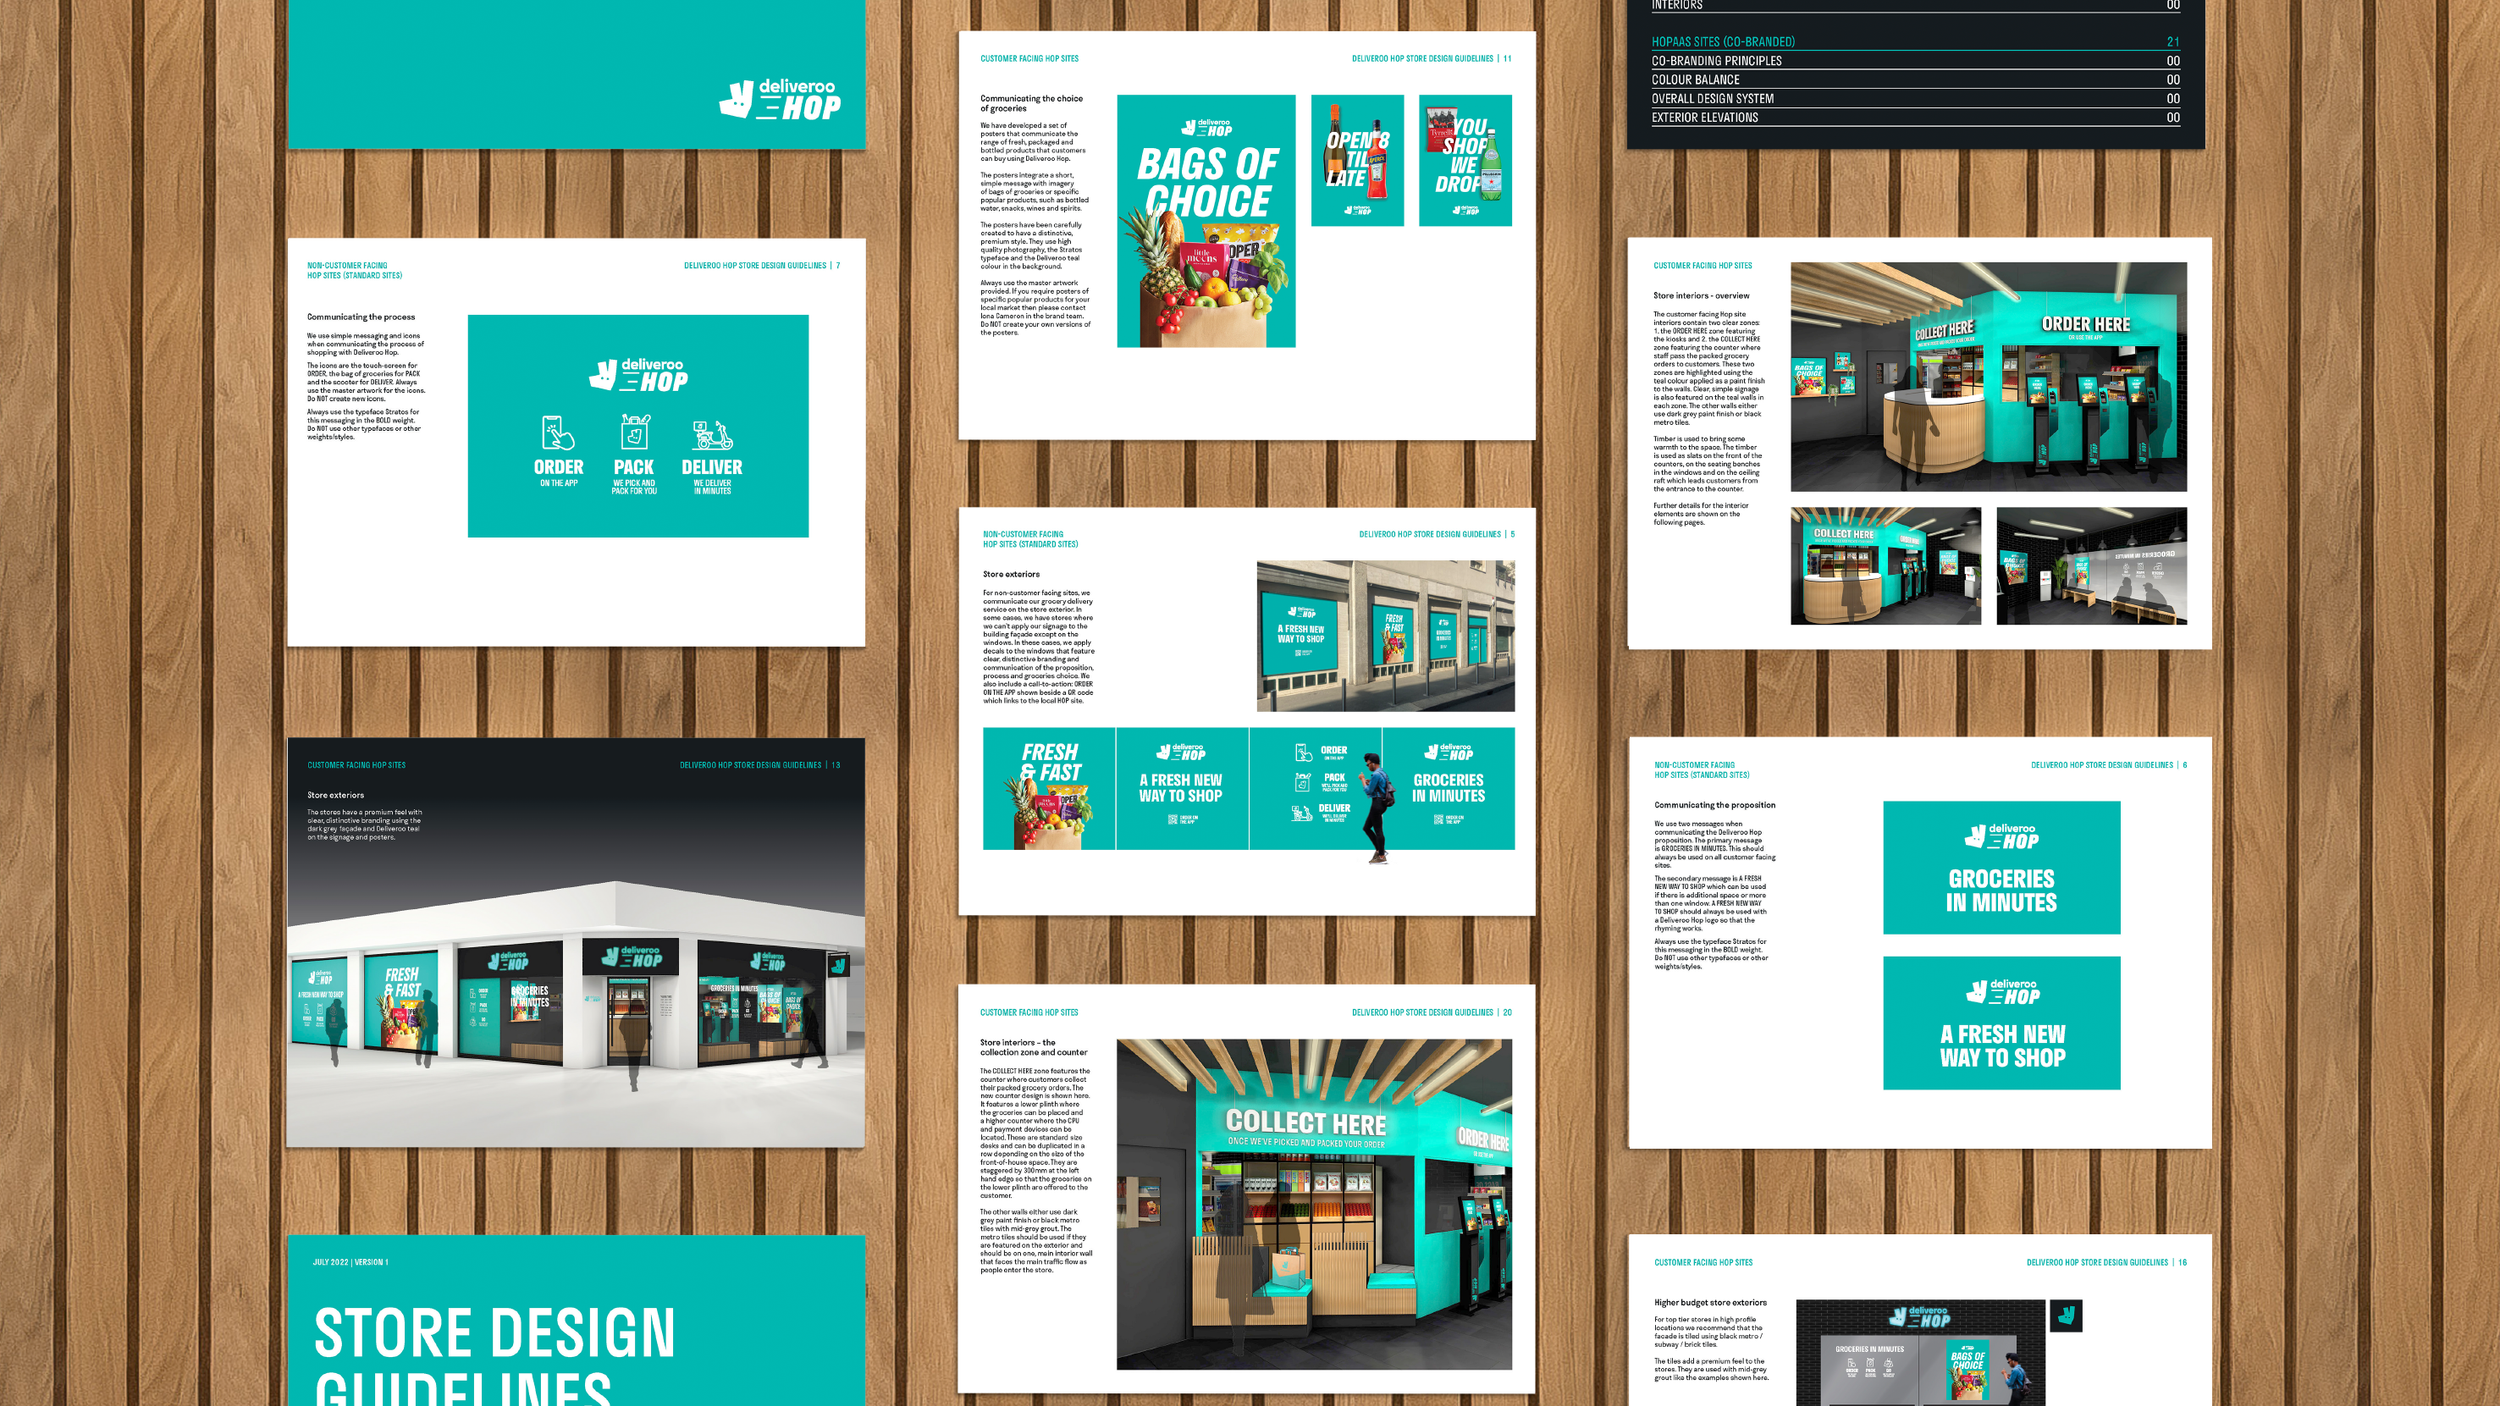 Deliveroo case study layout-JC-16.png